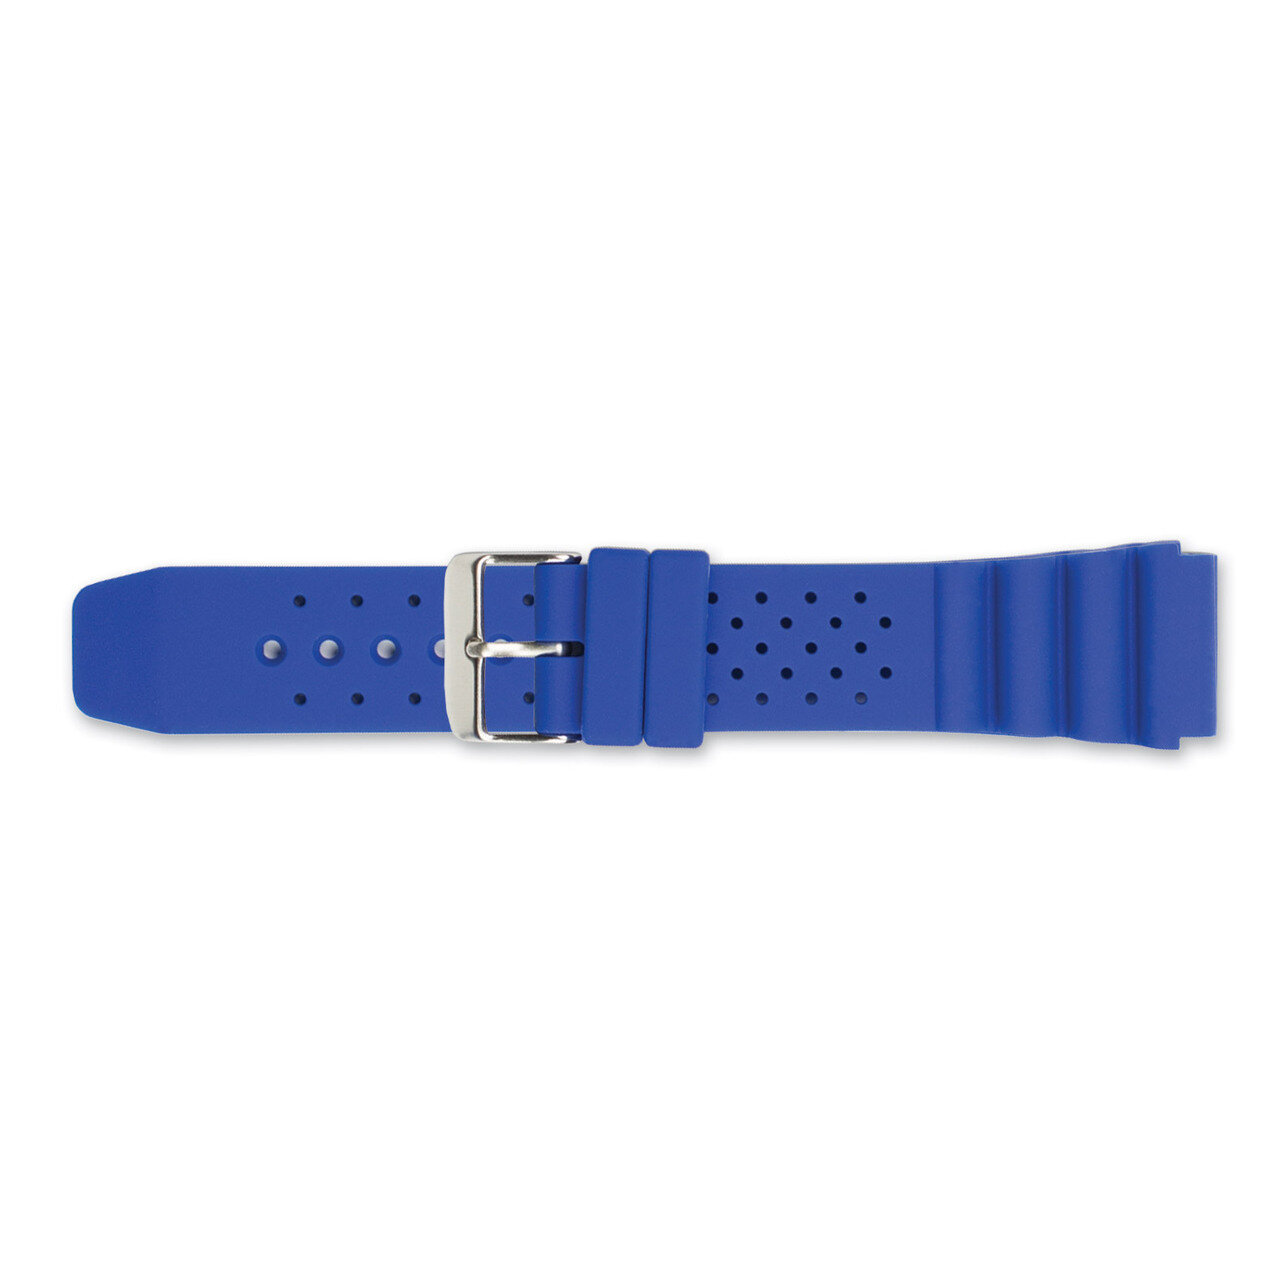 20mm Blue Silicone Rubber Watch Band 8.5 Inch Silver-tone Buckle BAW327-20